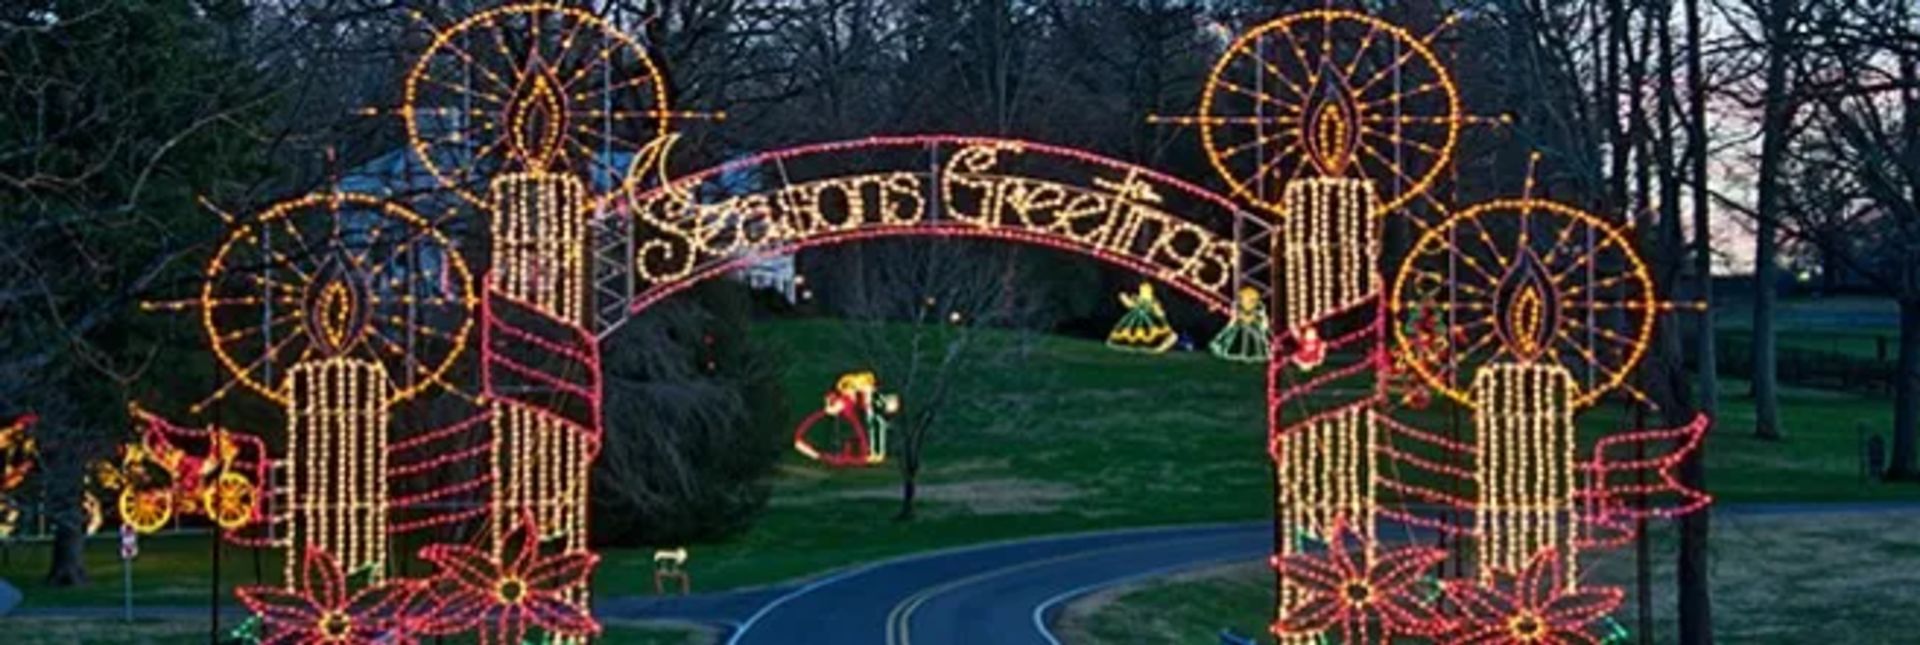 5 Great Places for Holiday Lights Viewing near Greensboro!